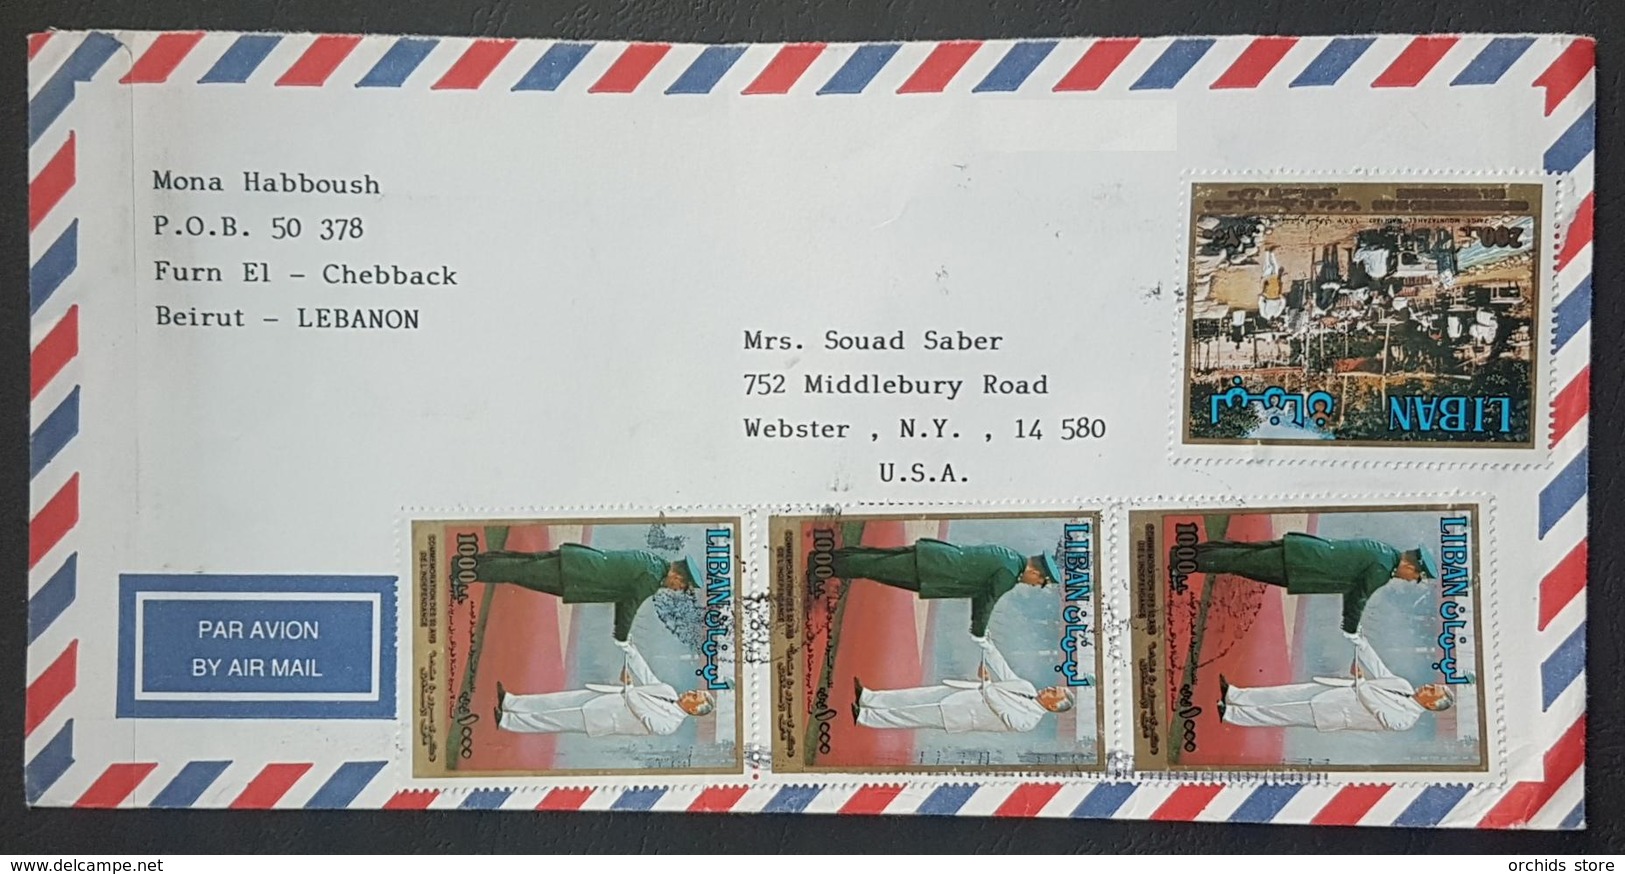 CM2 - Lebanon 1993 Beautiful Air Mail Cover Franked A Stripx3 Hrawi Stamps 1000L + 200L ! - Lebanon